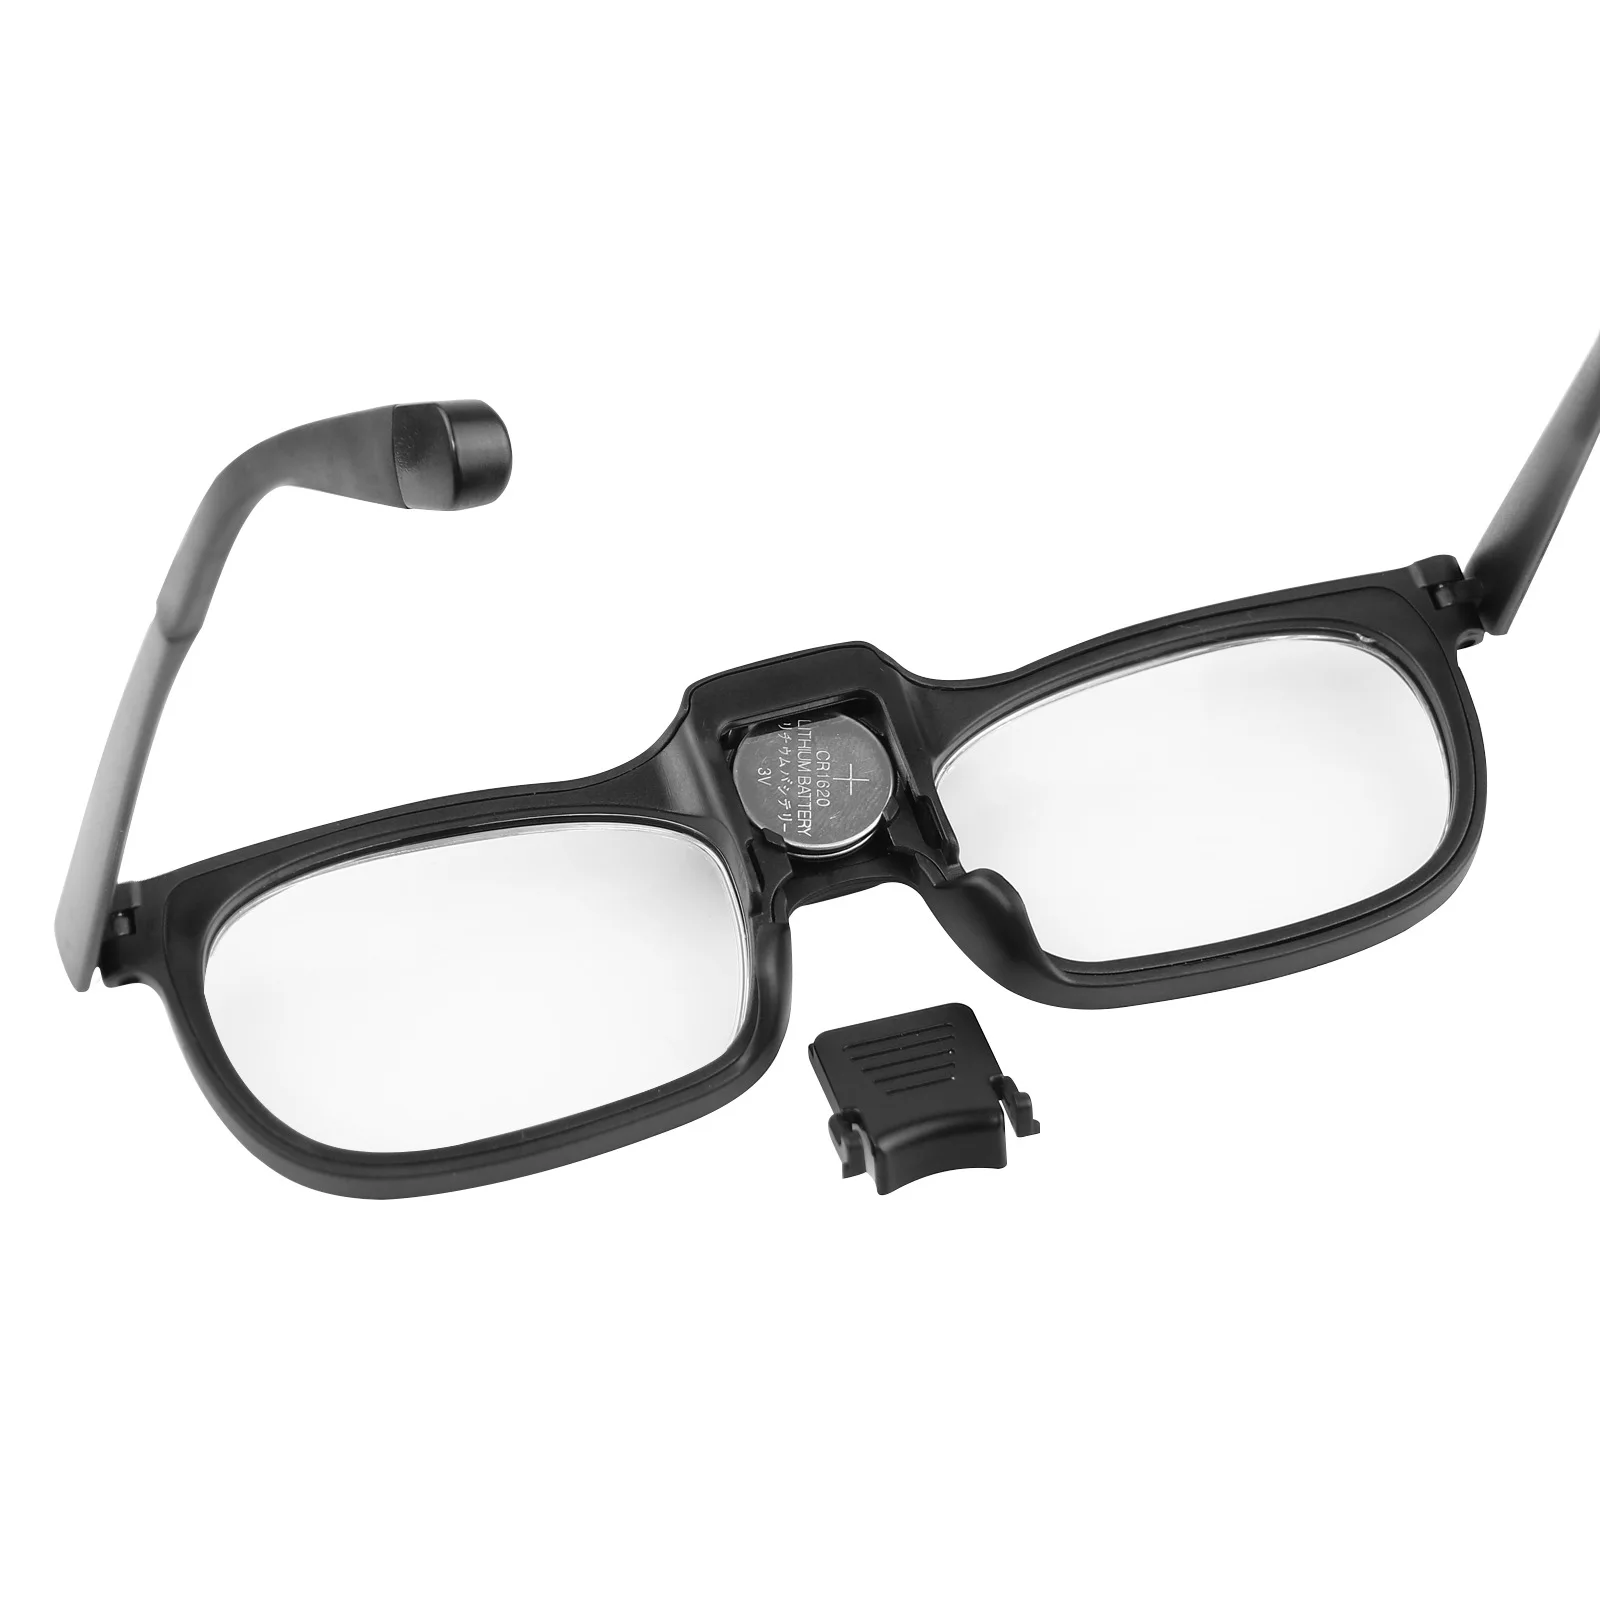 https://ae01.alicdn.com/kf/S791d341f055044da9e3b6409416d8c50j/Magnifying-Glasses-with-2Led-Light-Metal-Wrapped-Rubber-Legs-for-Reading-and-Fishing-Repair-Magnifier.jpg